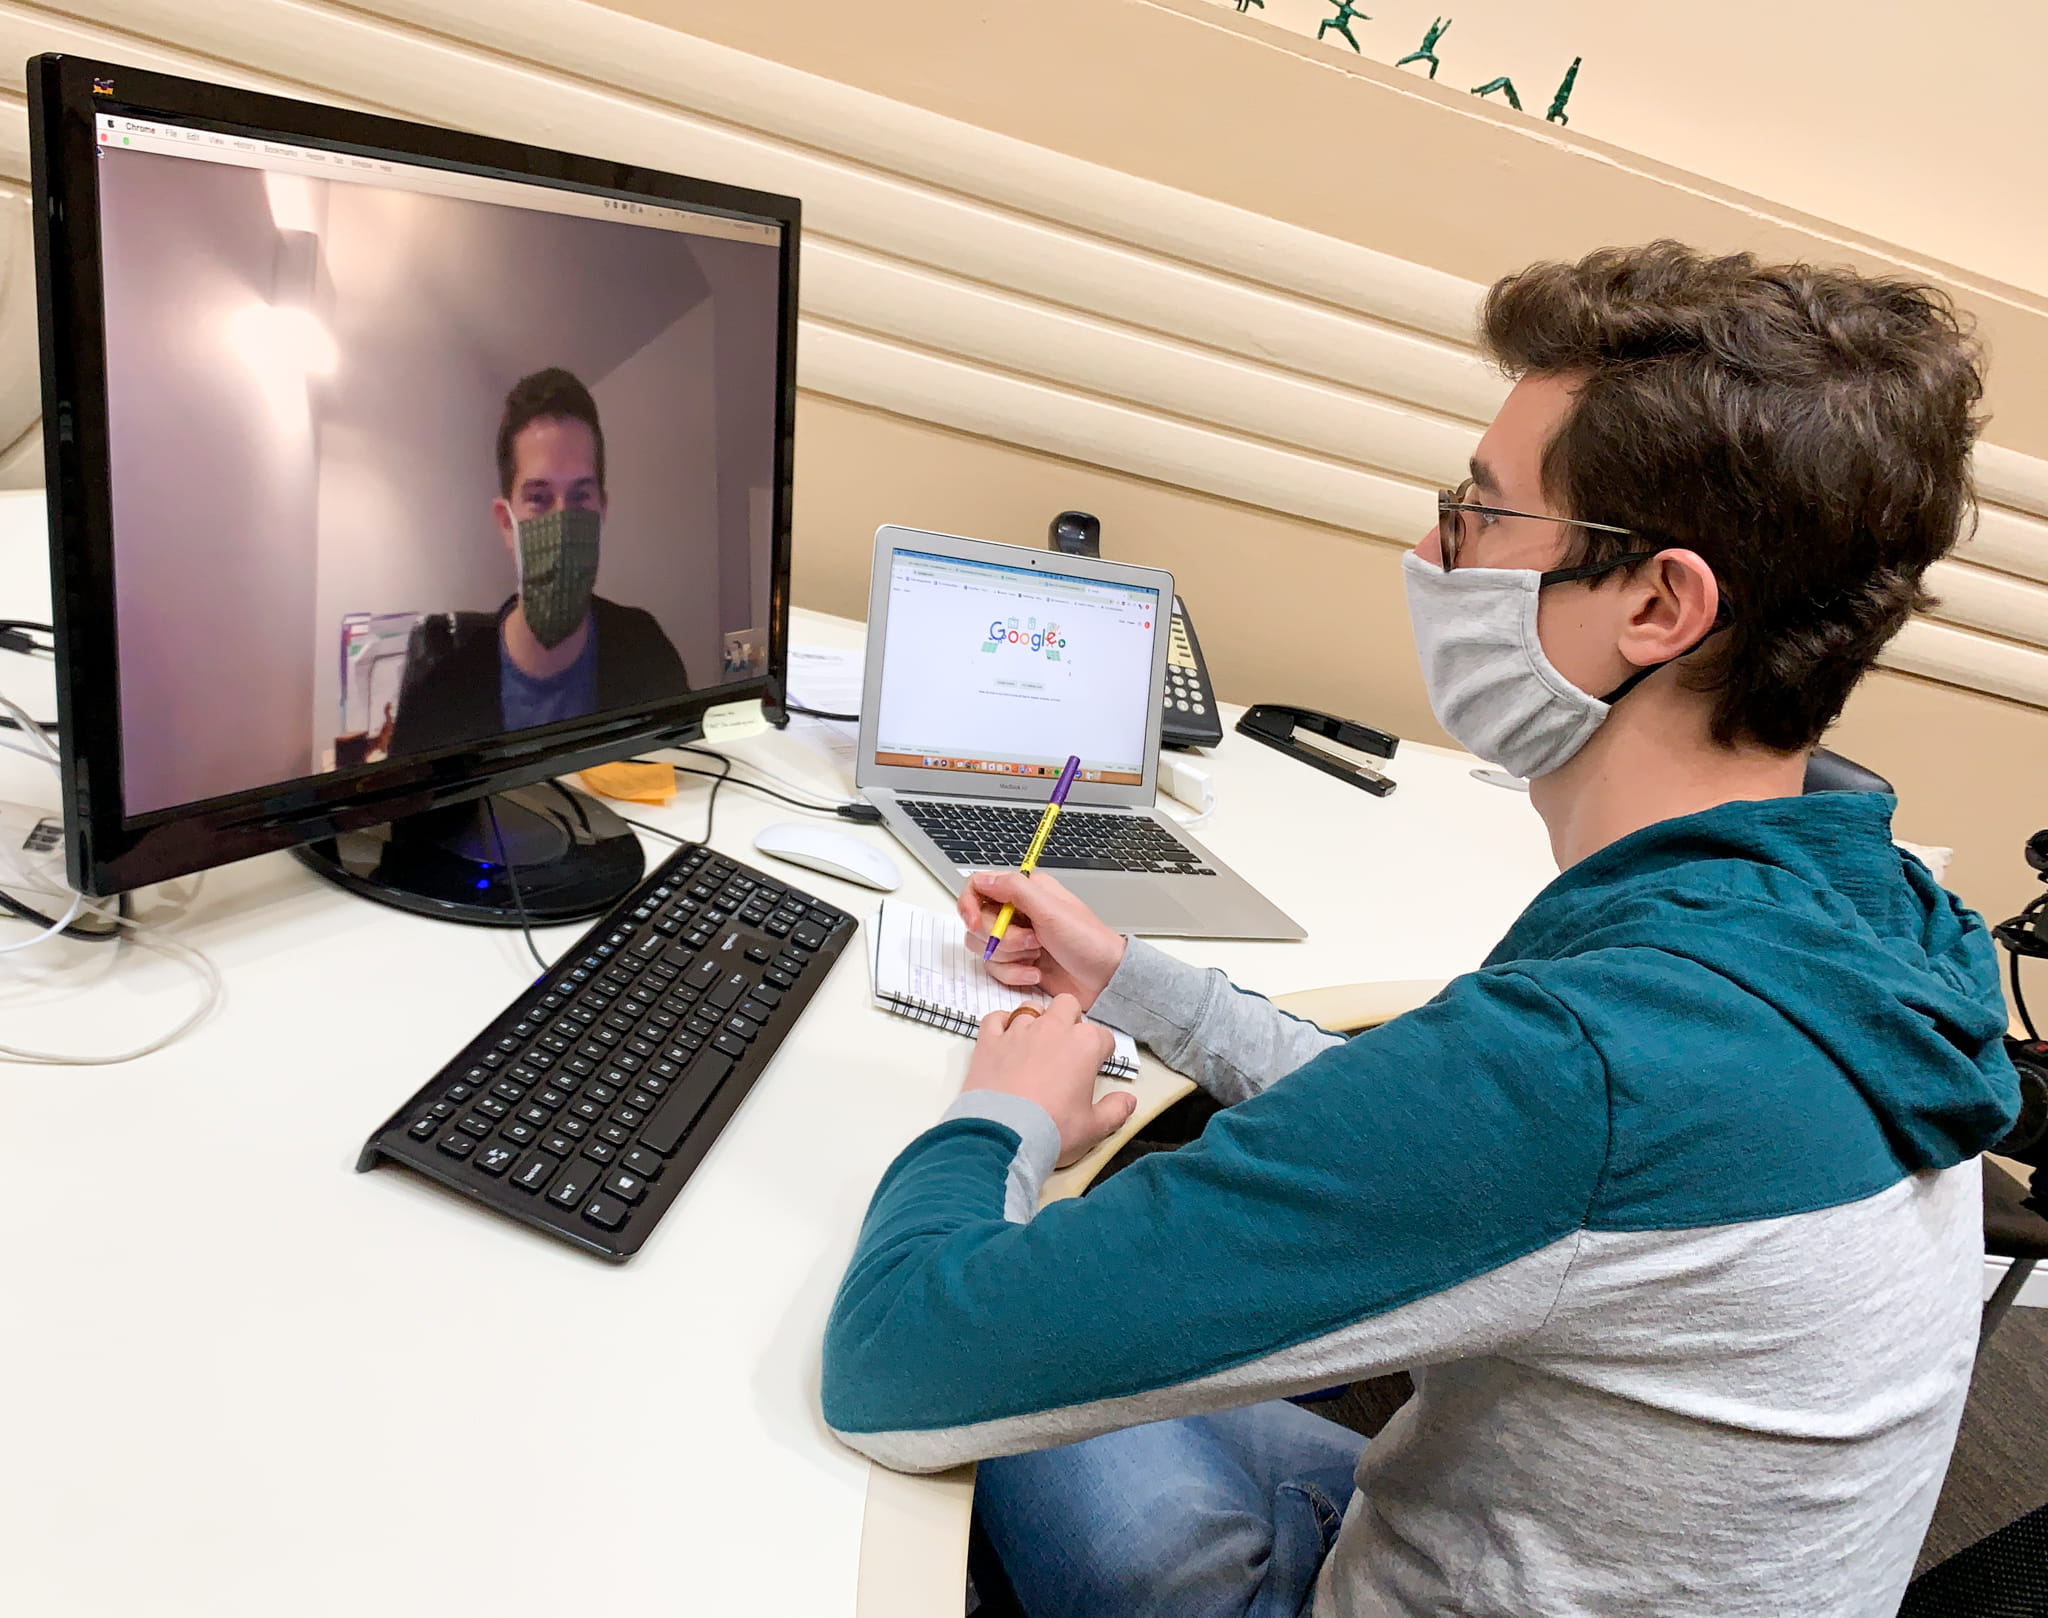 Man wearing face mask while on video conference call at work